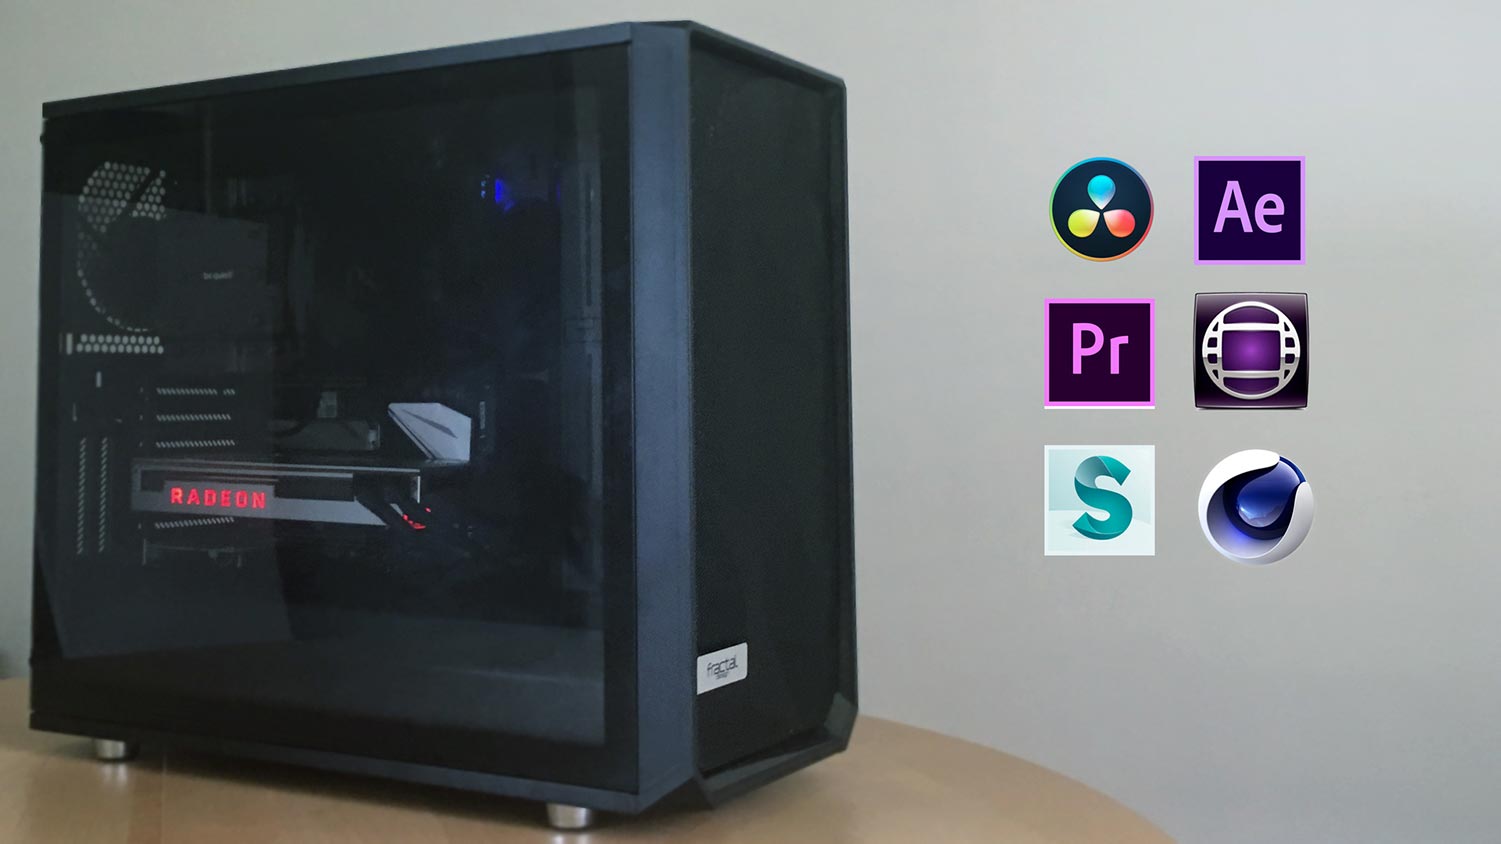 My PC Build For Video Editing, Compositing & Color Grading